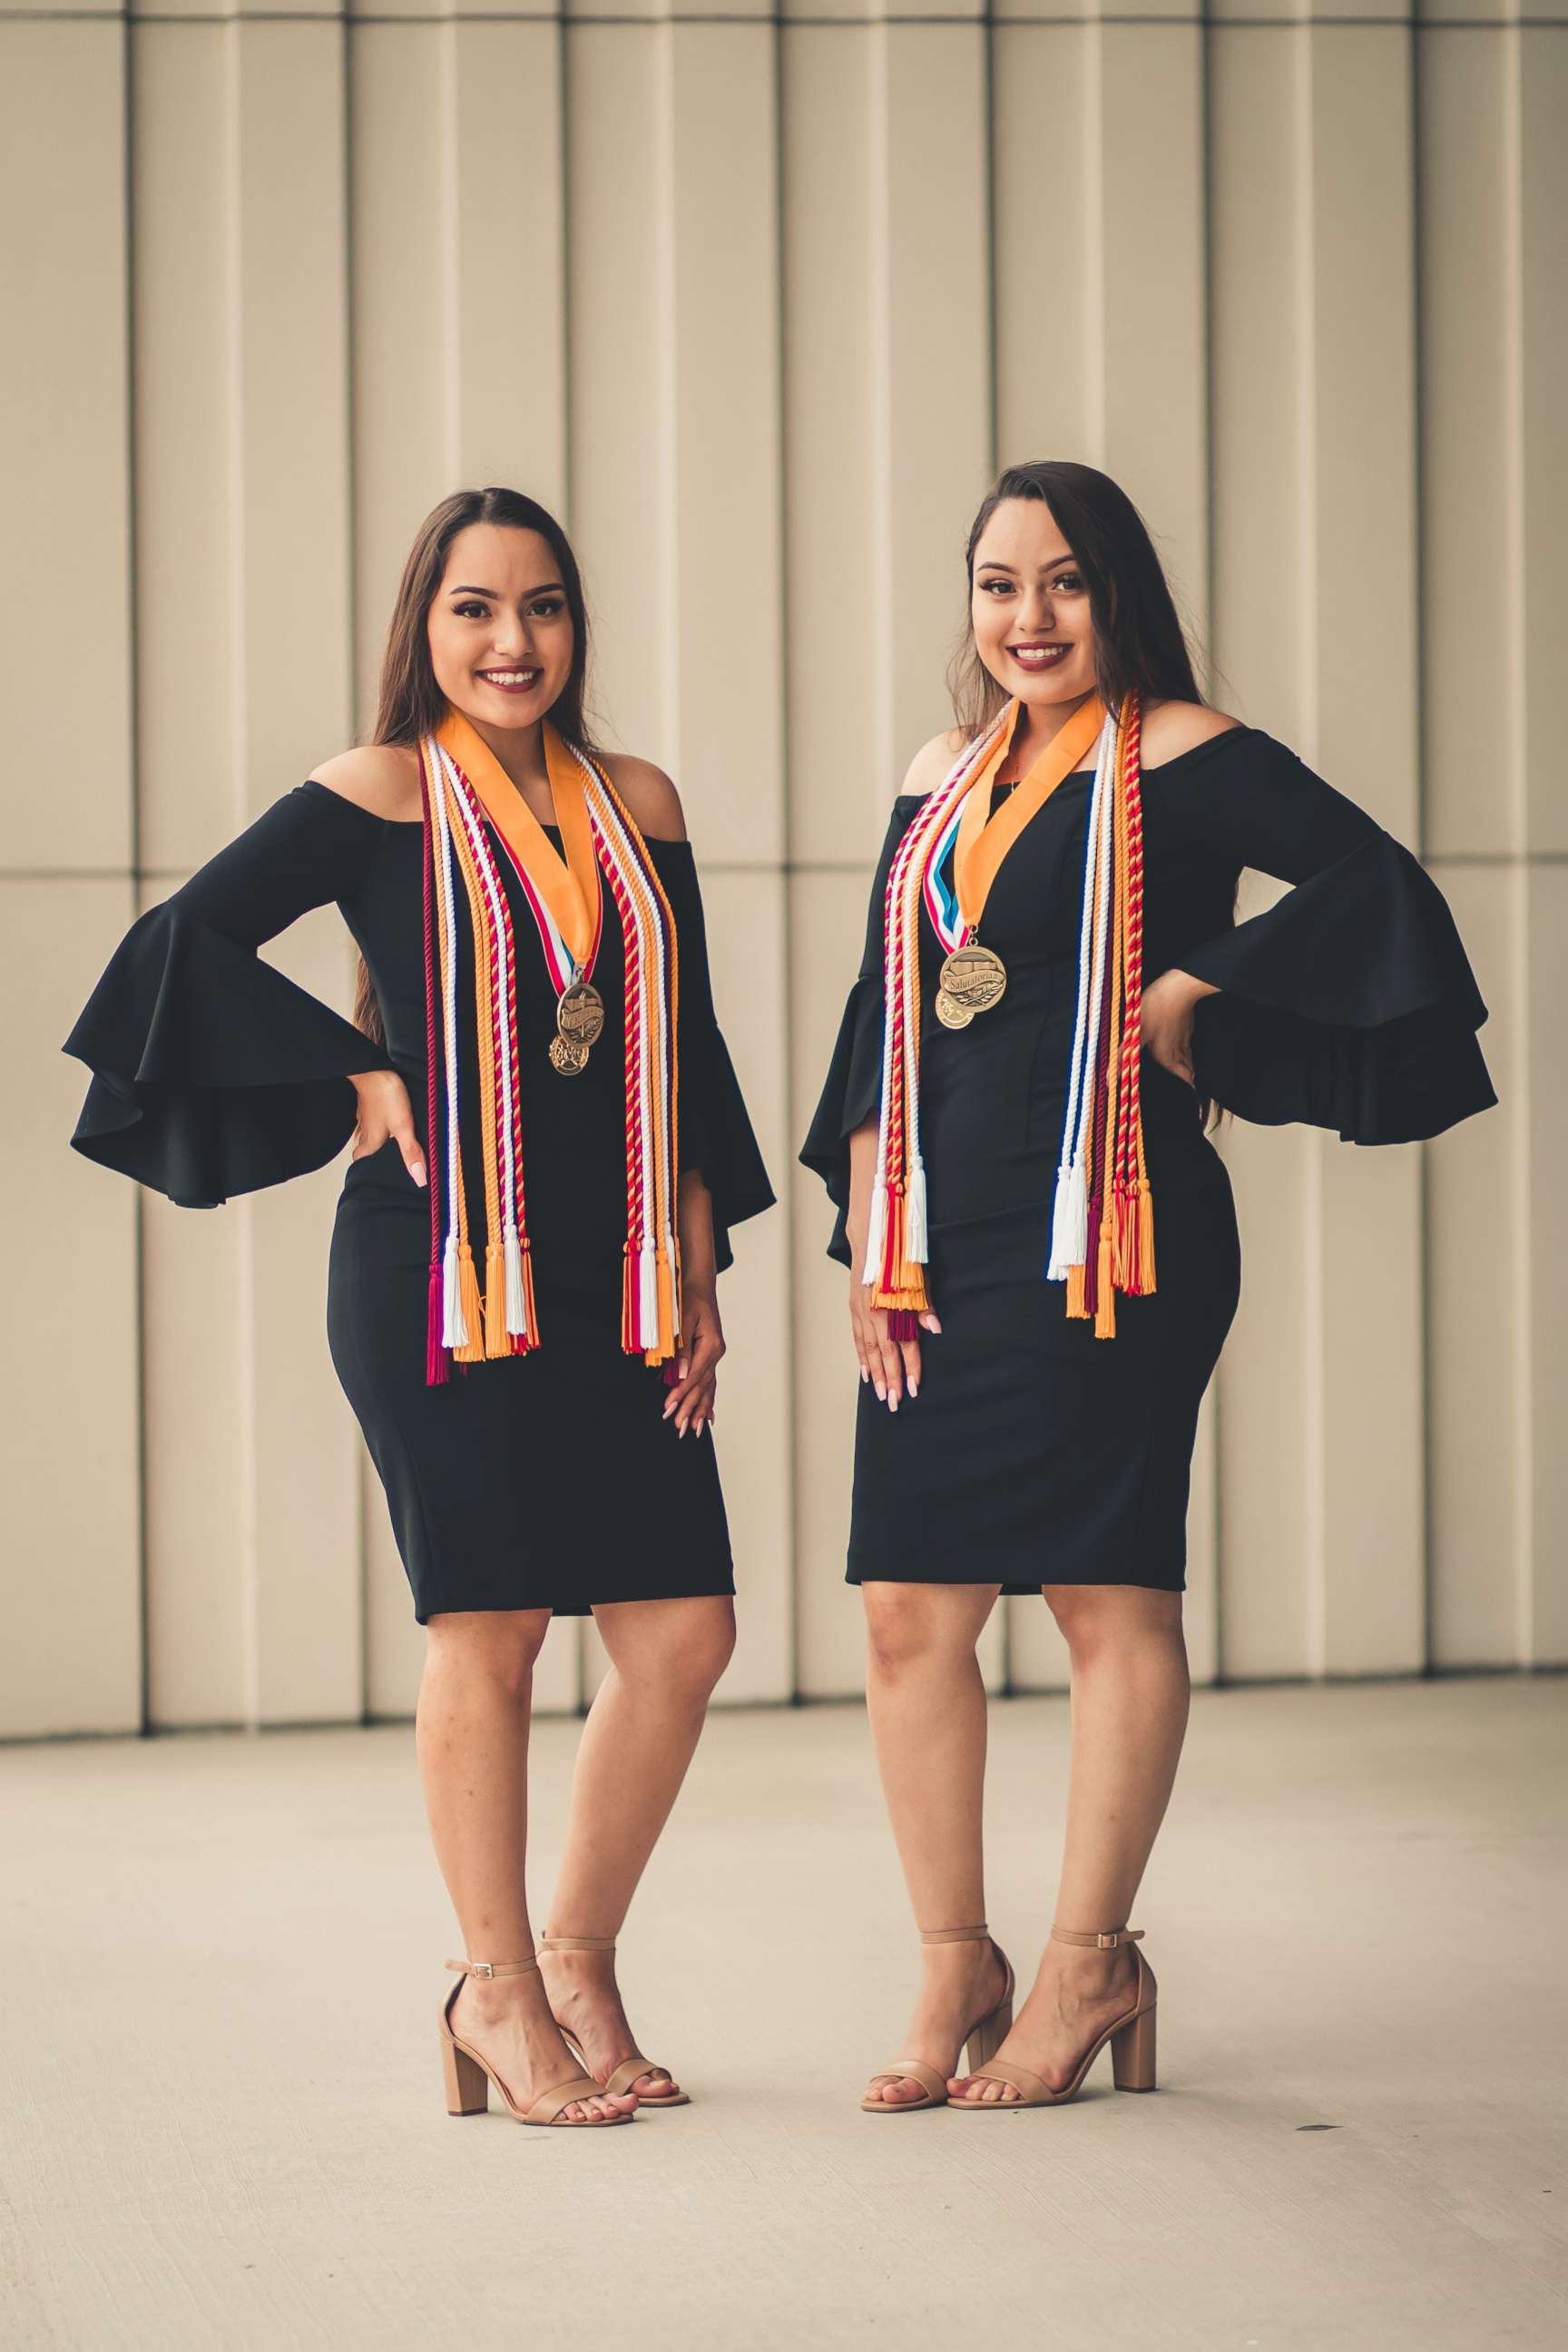 PHOTO: A set of twins, Judith and Janette Briseño, 17, have been named valedictorian and salutatorian of Mesquite High School's graduating class of 2020 in Texas.